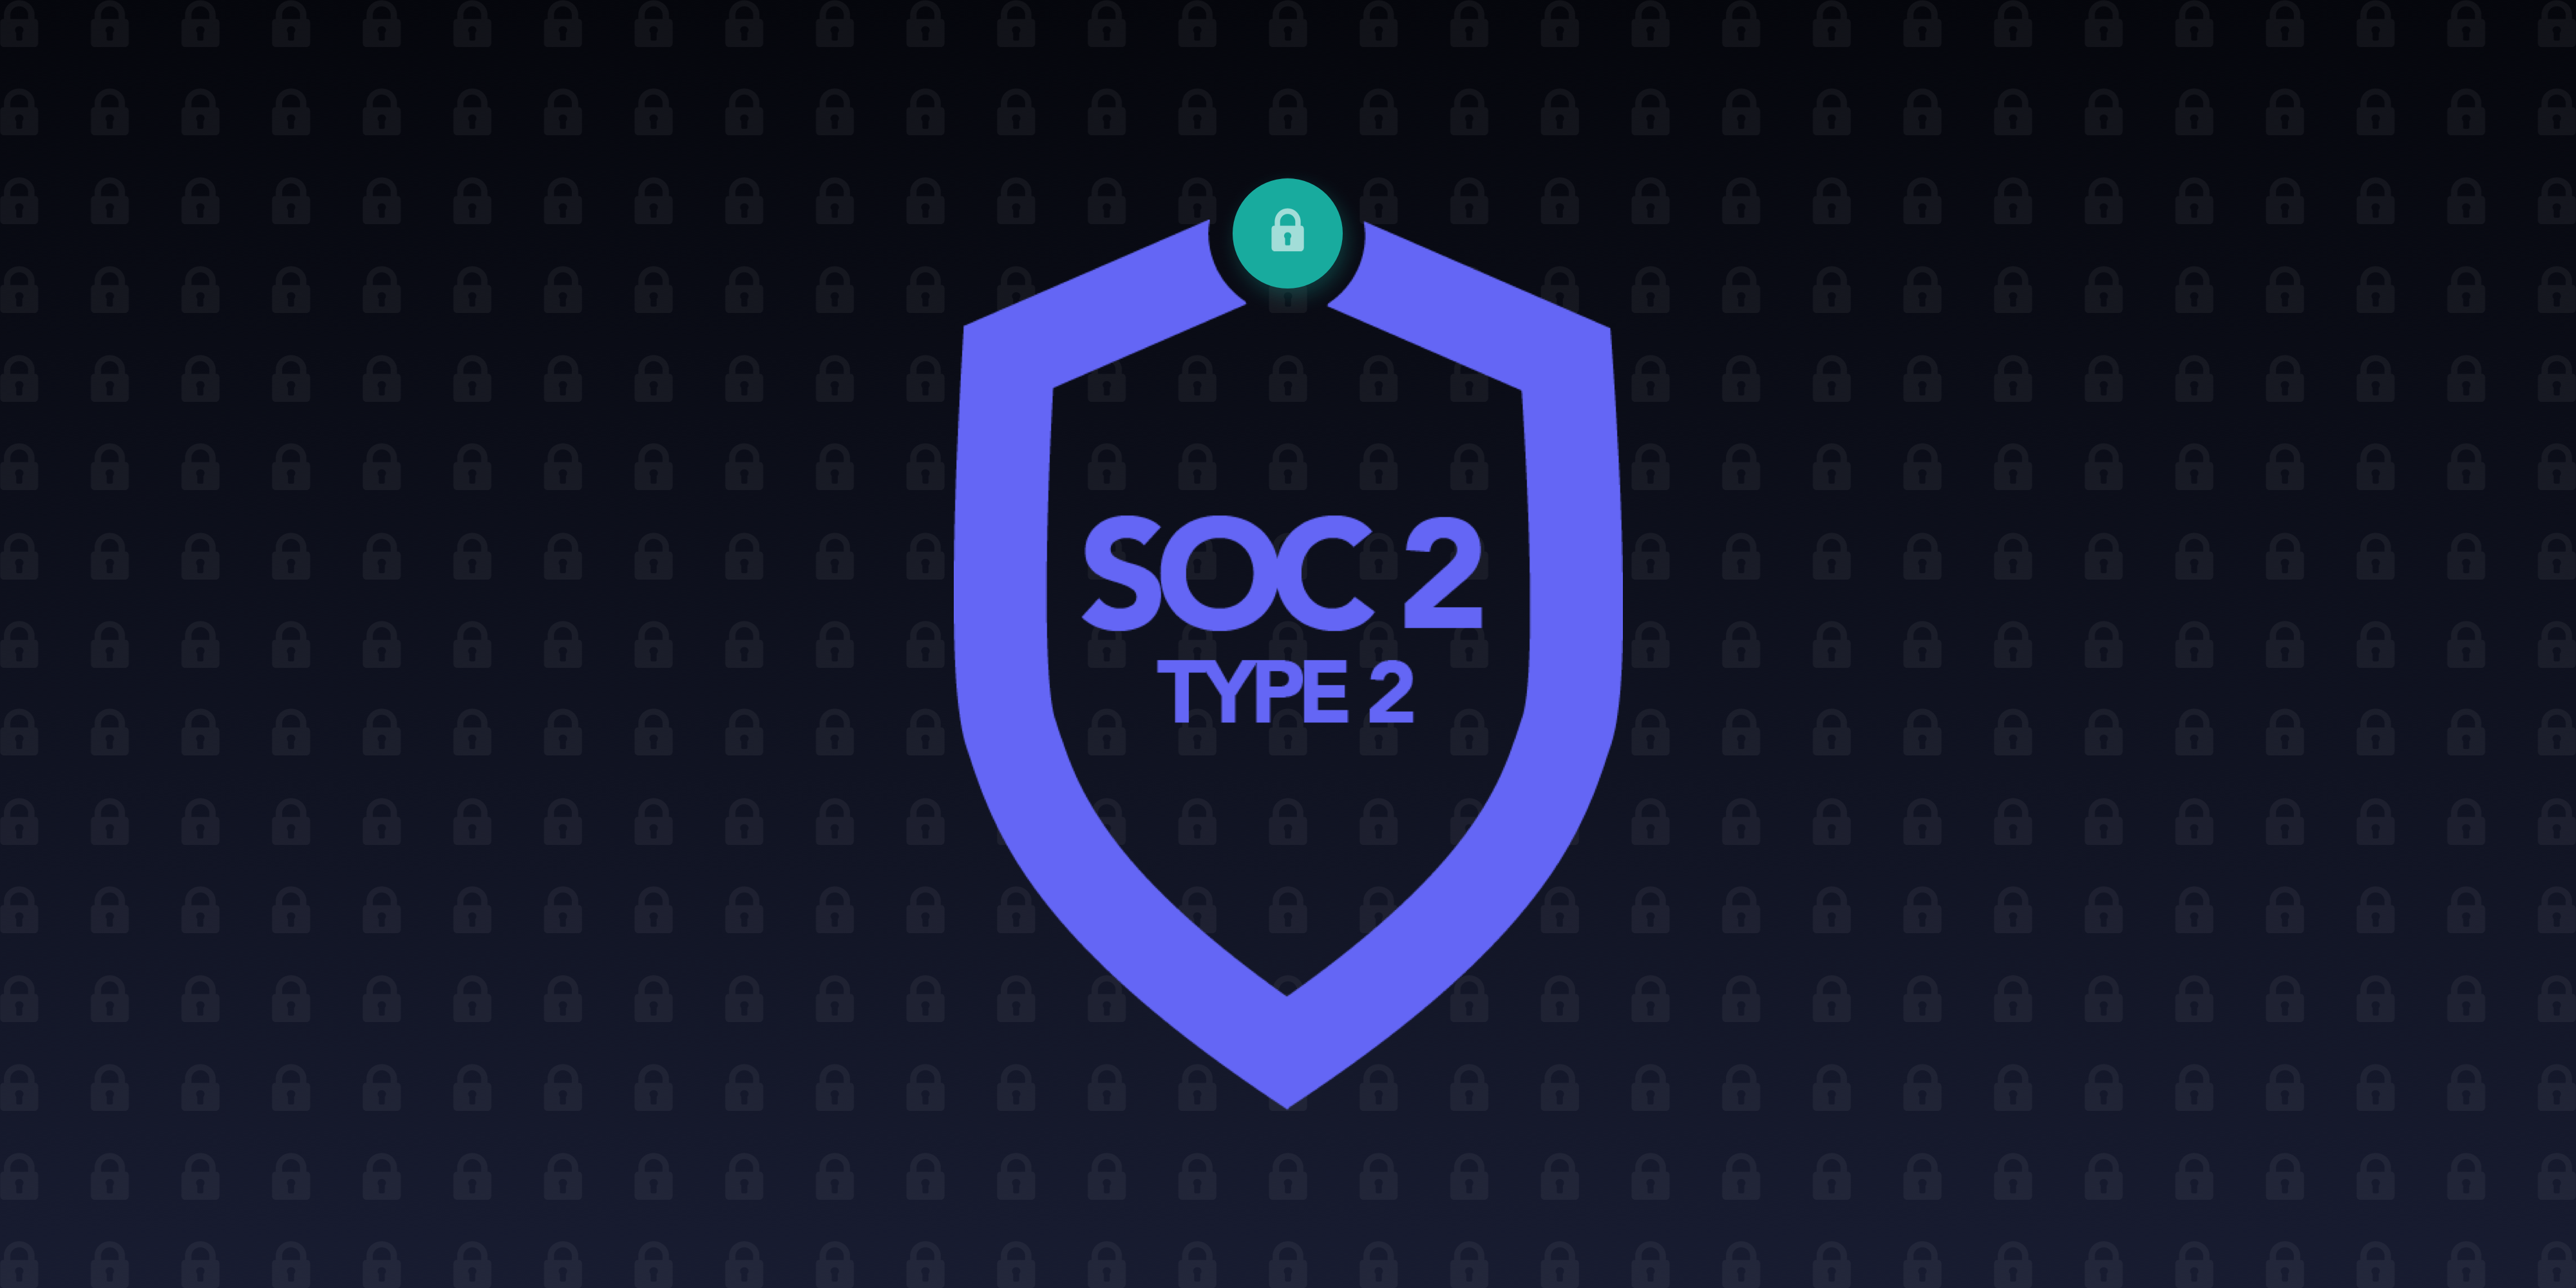 Frame.io Boosts Enterprise-level Security: Now SOC 2 Type 2 Compliant